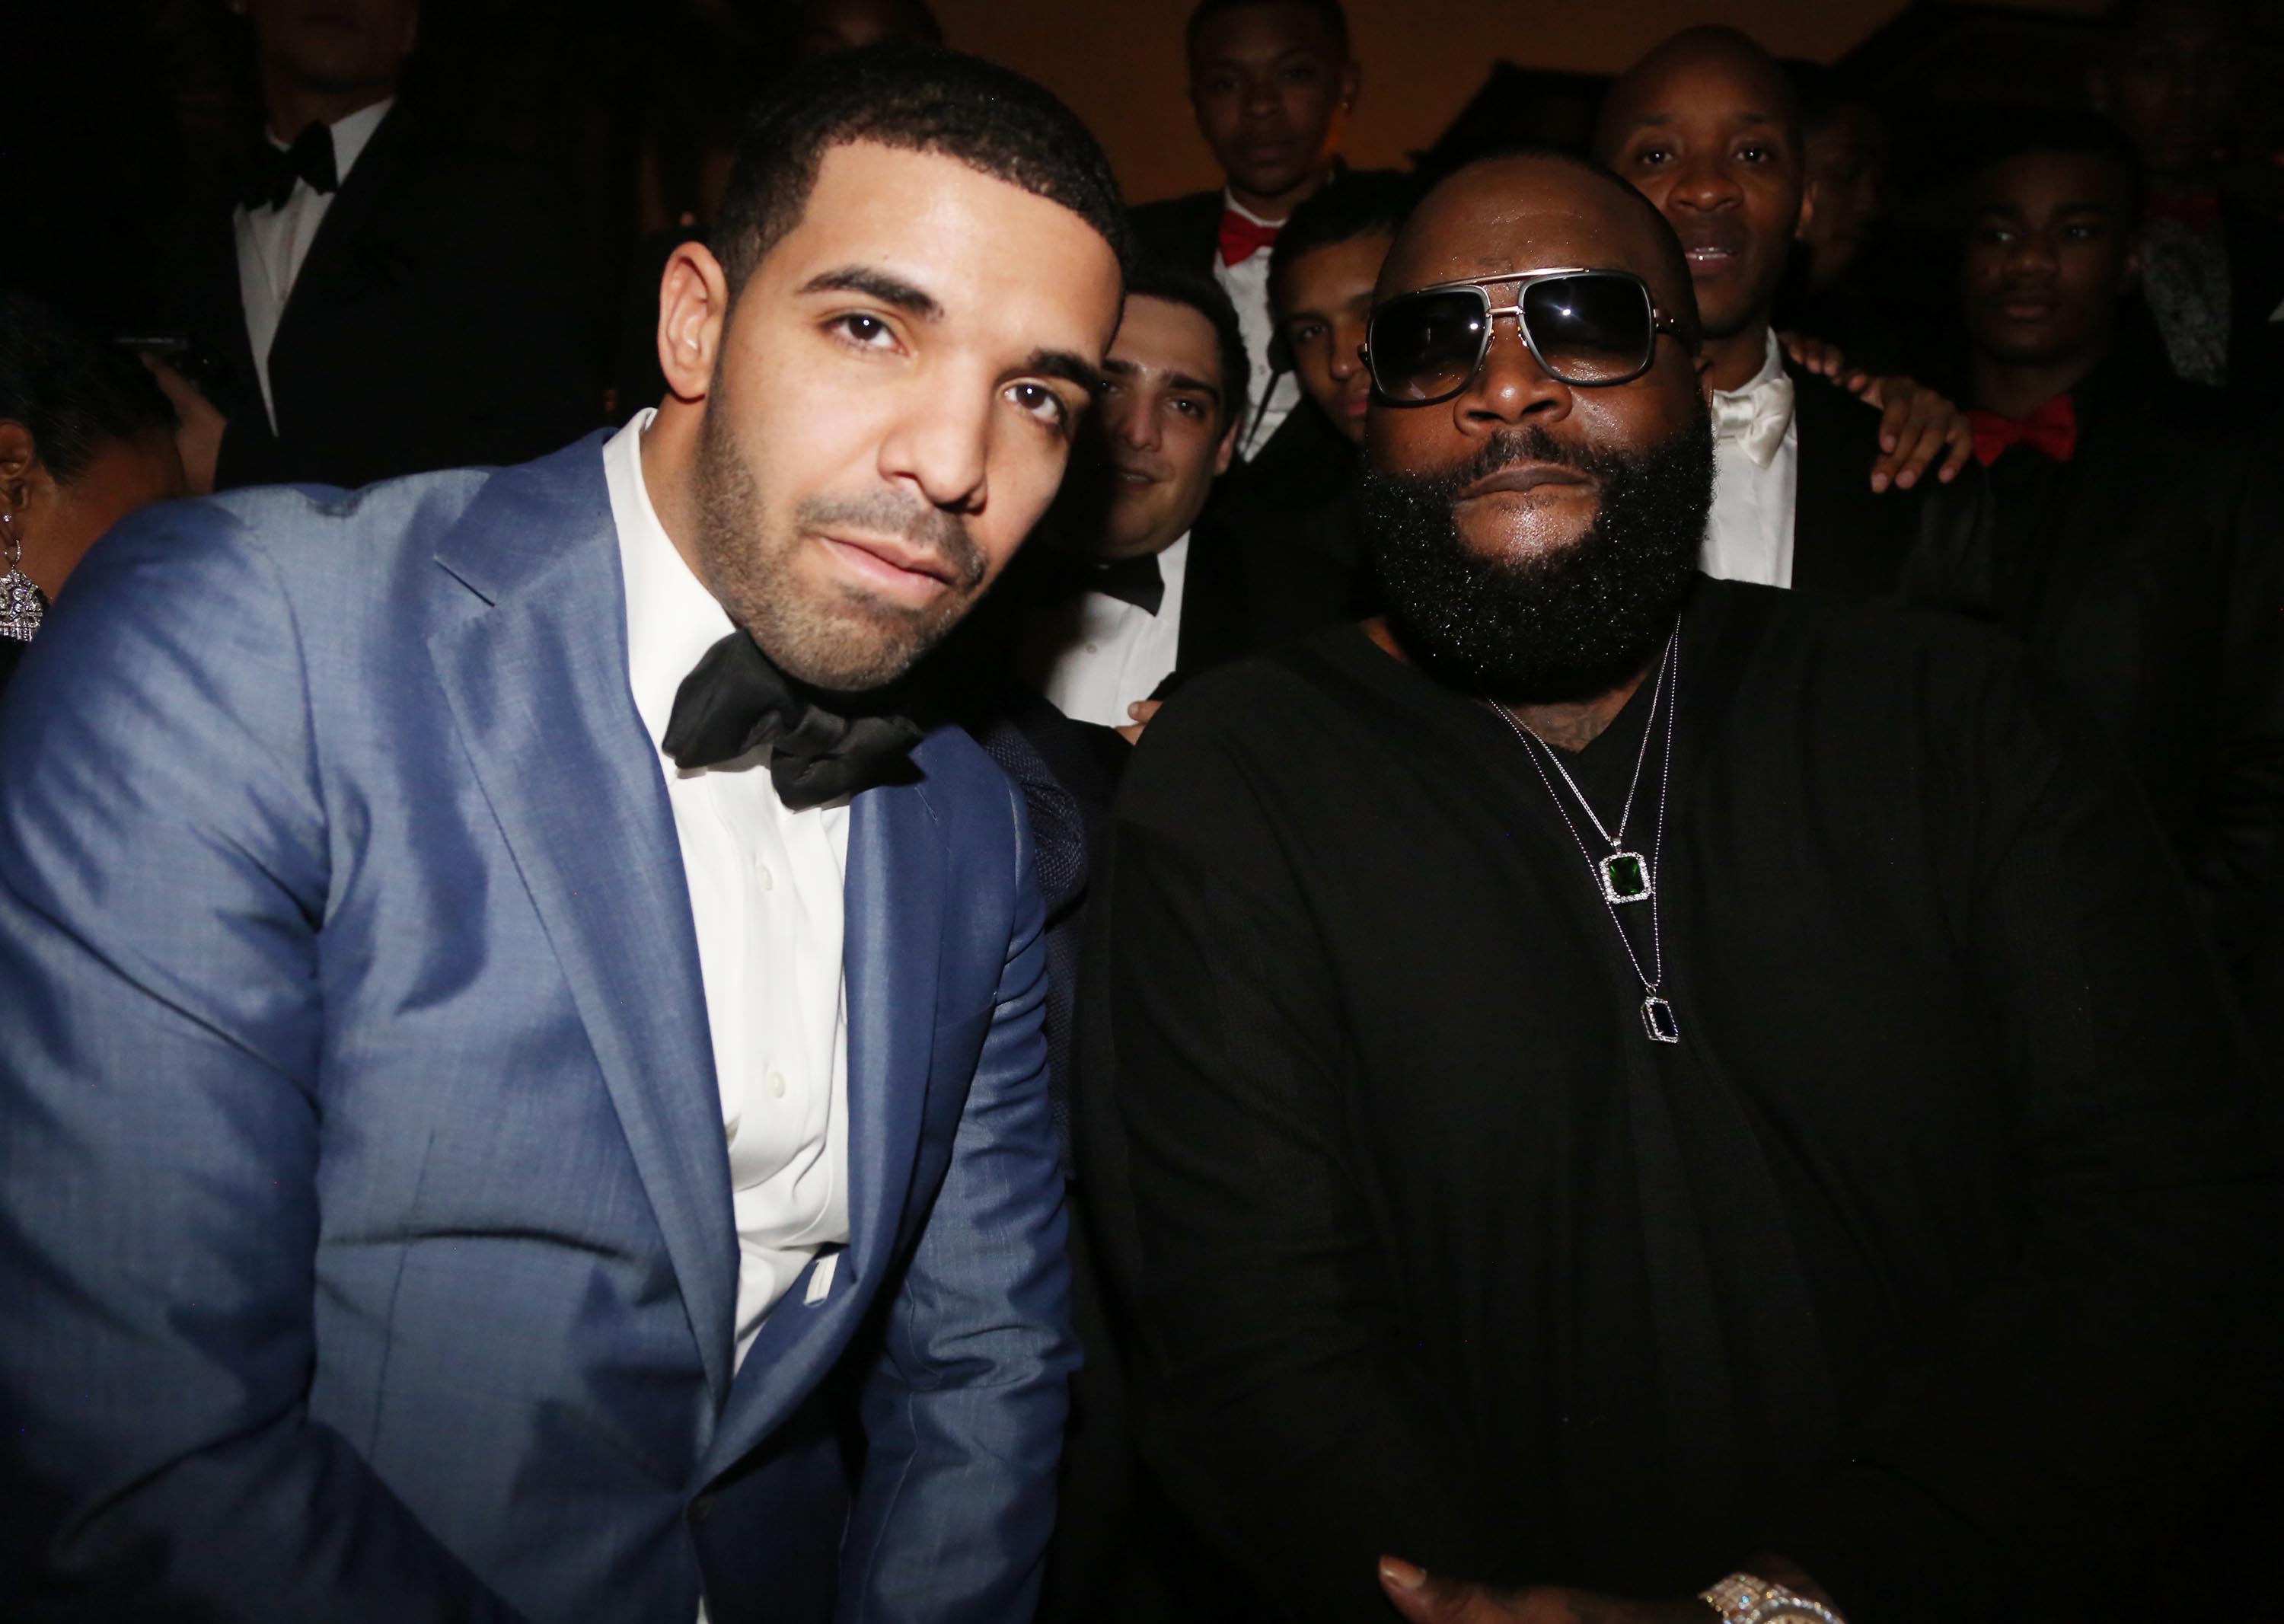 Rick Ross says a collab album with Drake is under "serious considerati...